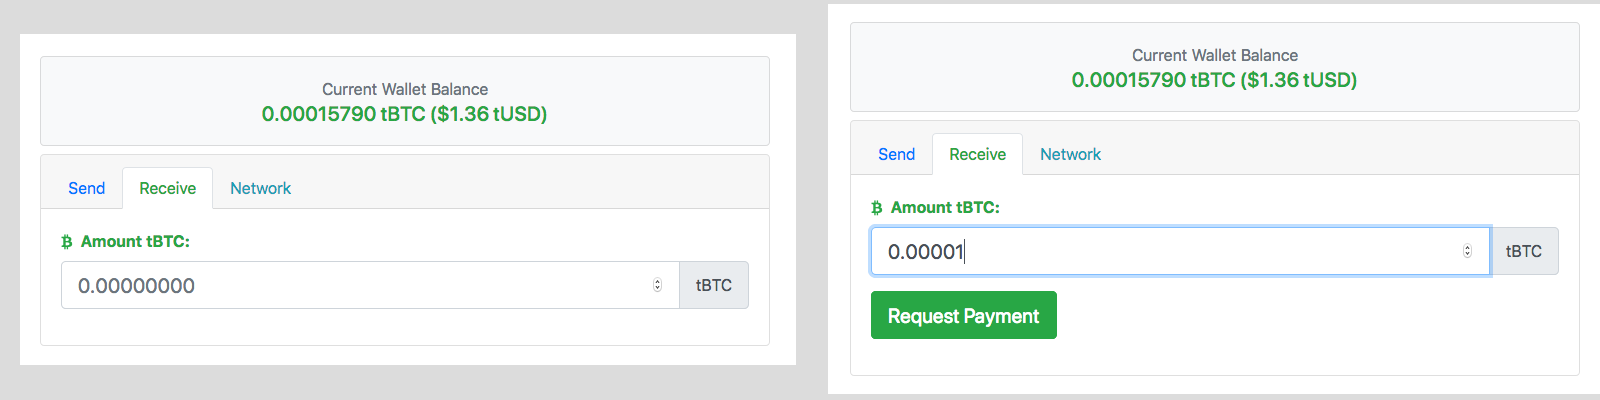 HTLC requesting payment screen